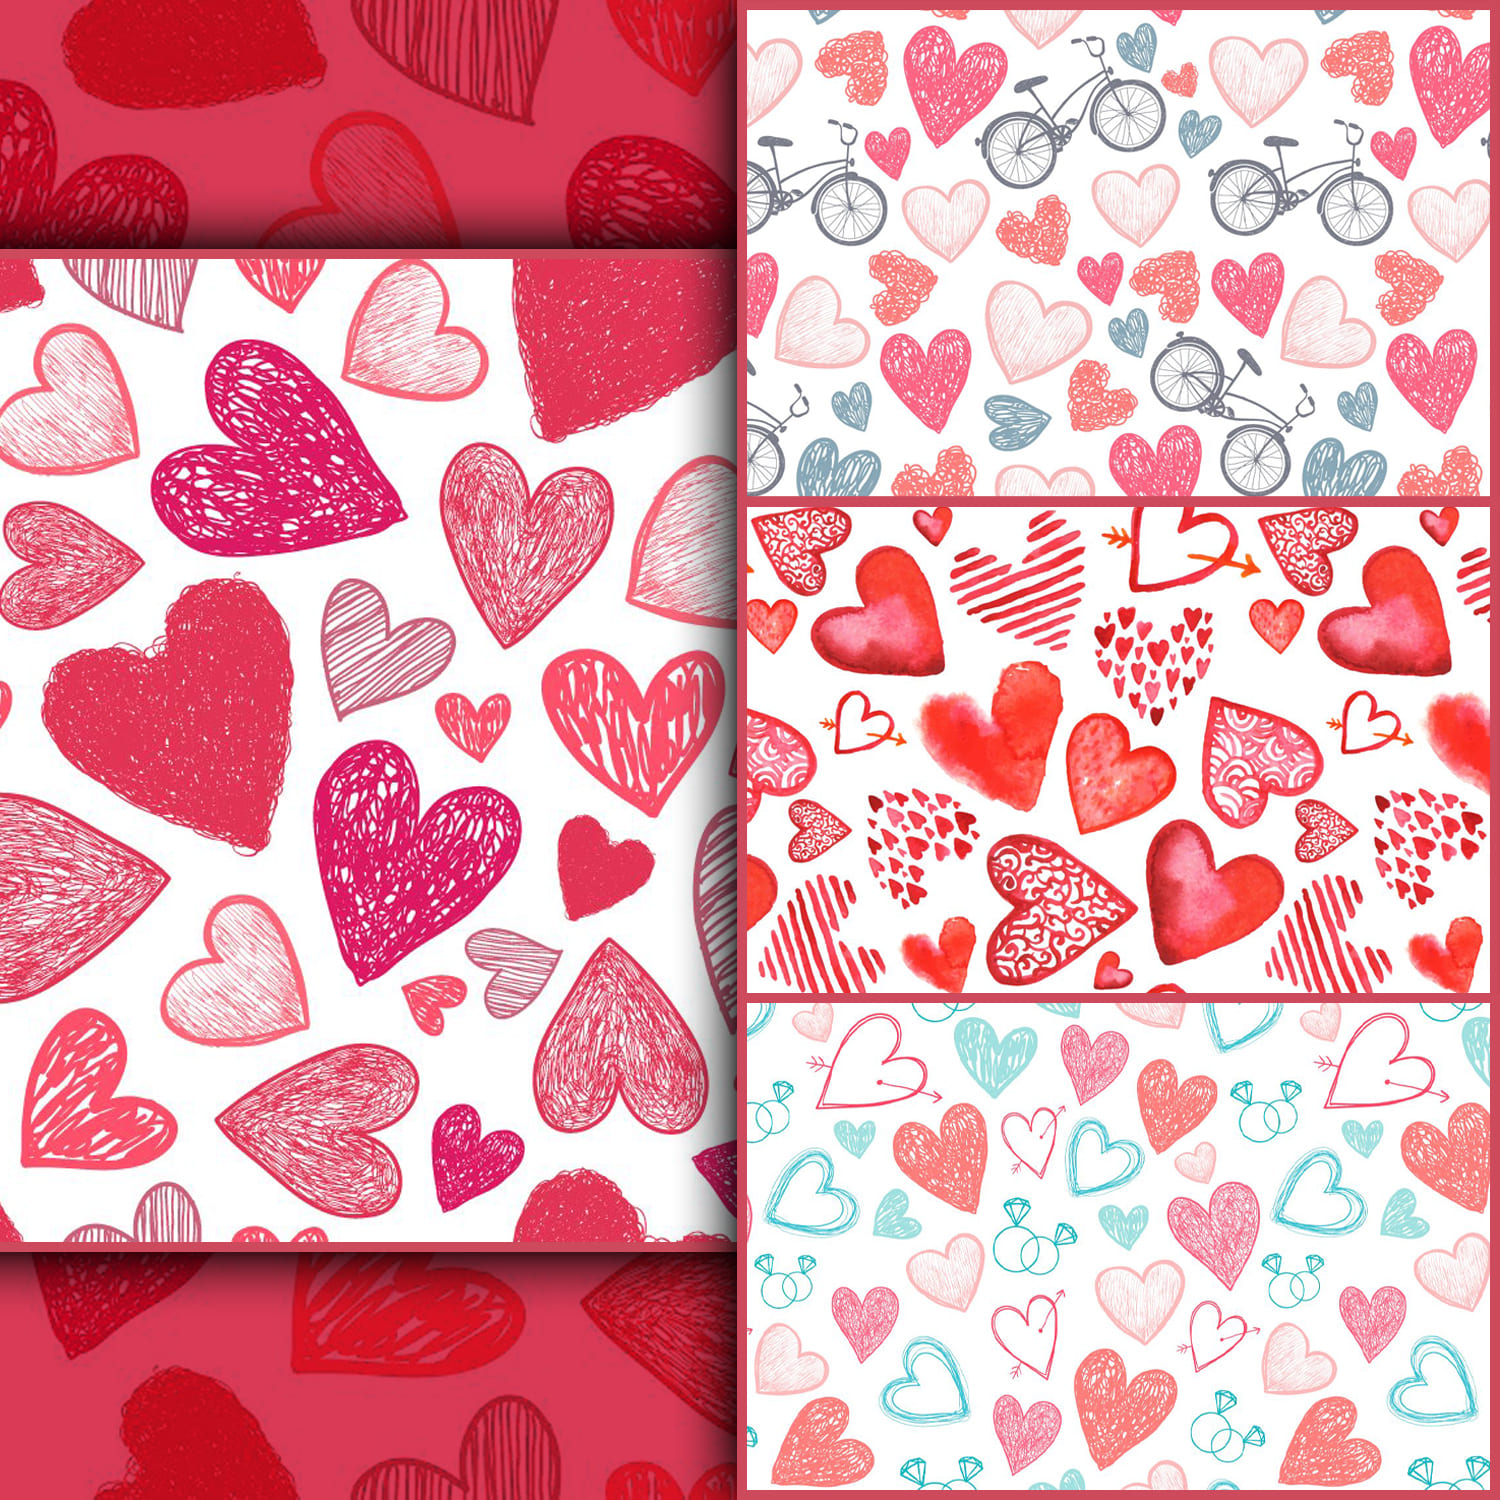 Hearts and romantic patterns by Marylia.